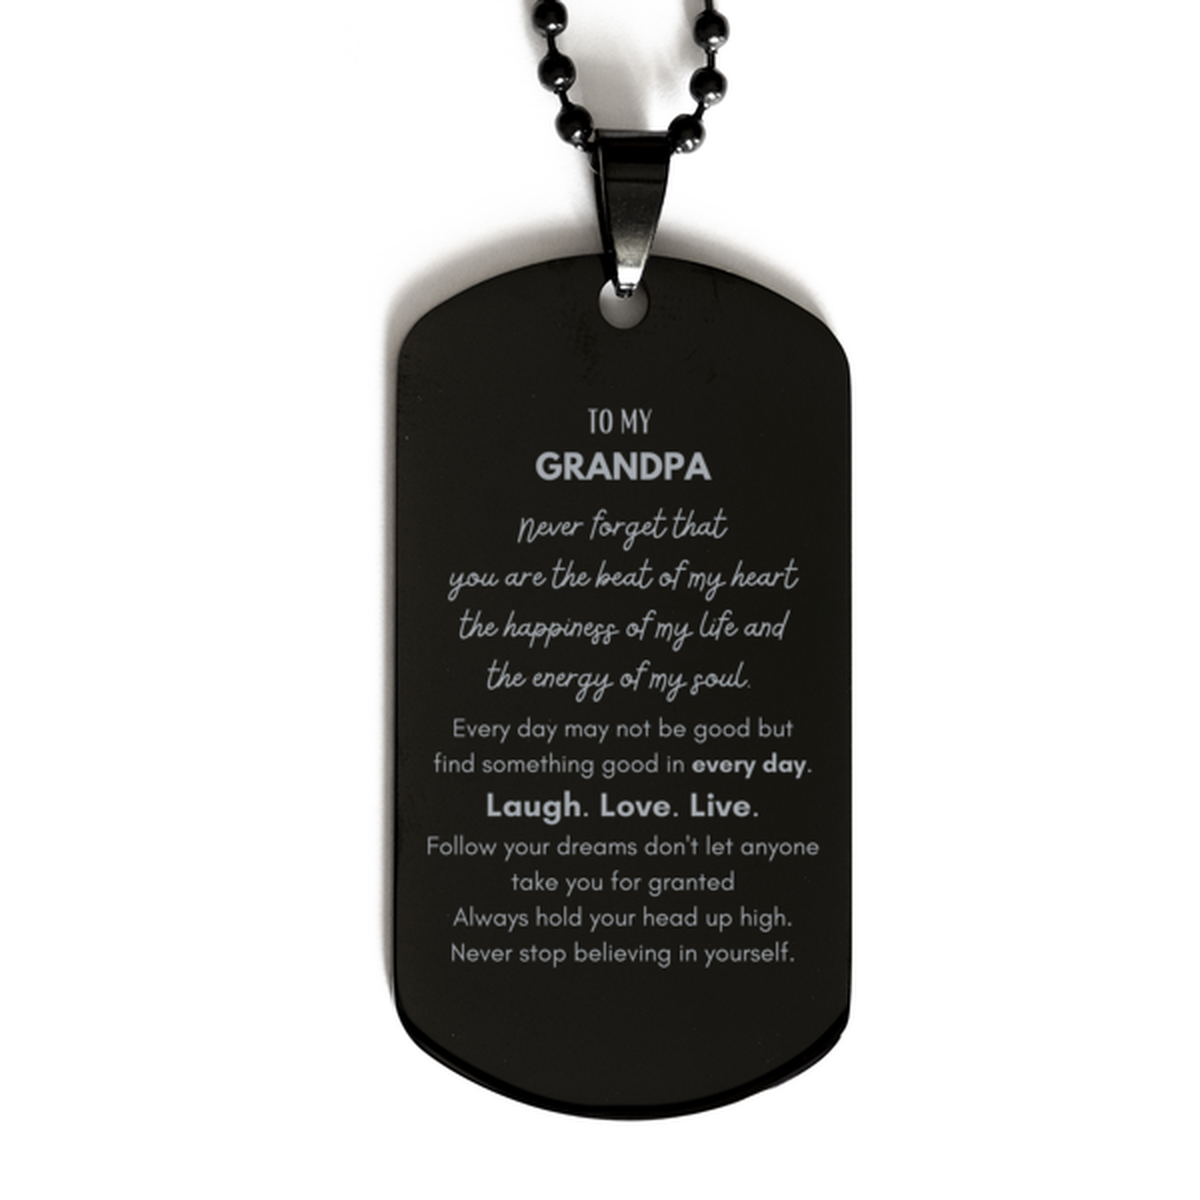 To My Grandpa Dogtag Gifts, Christmas Grandpa Black Dog Tag Present, Birthday Unique Motivational For Grandpa, To My Grandpa Never forget that you are the beat of my heart the happiness of my life and the energy of my soul